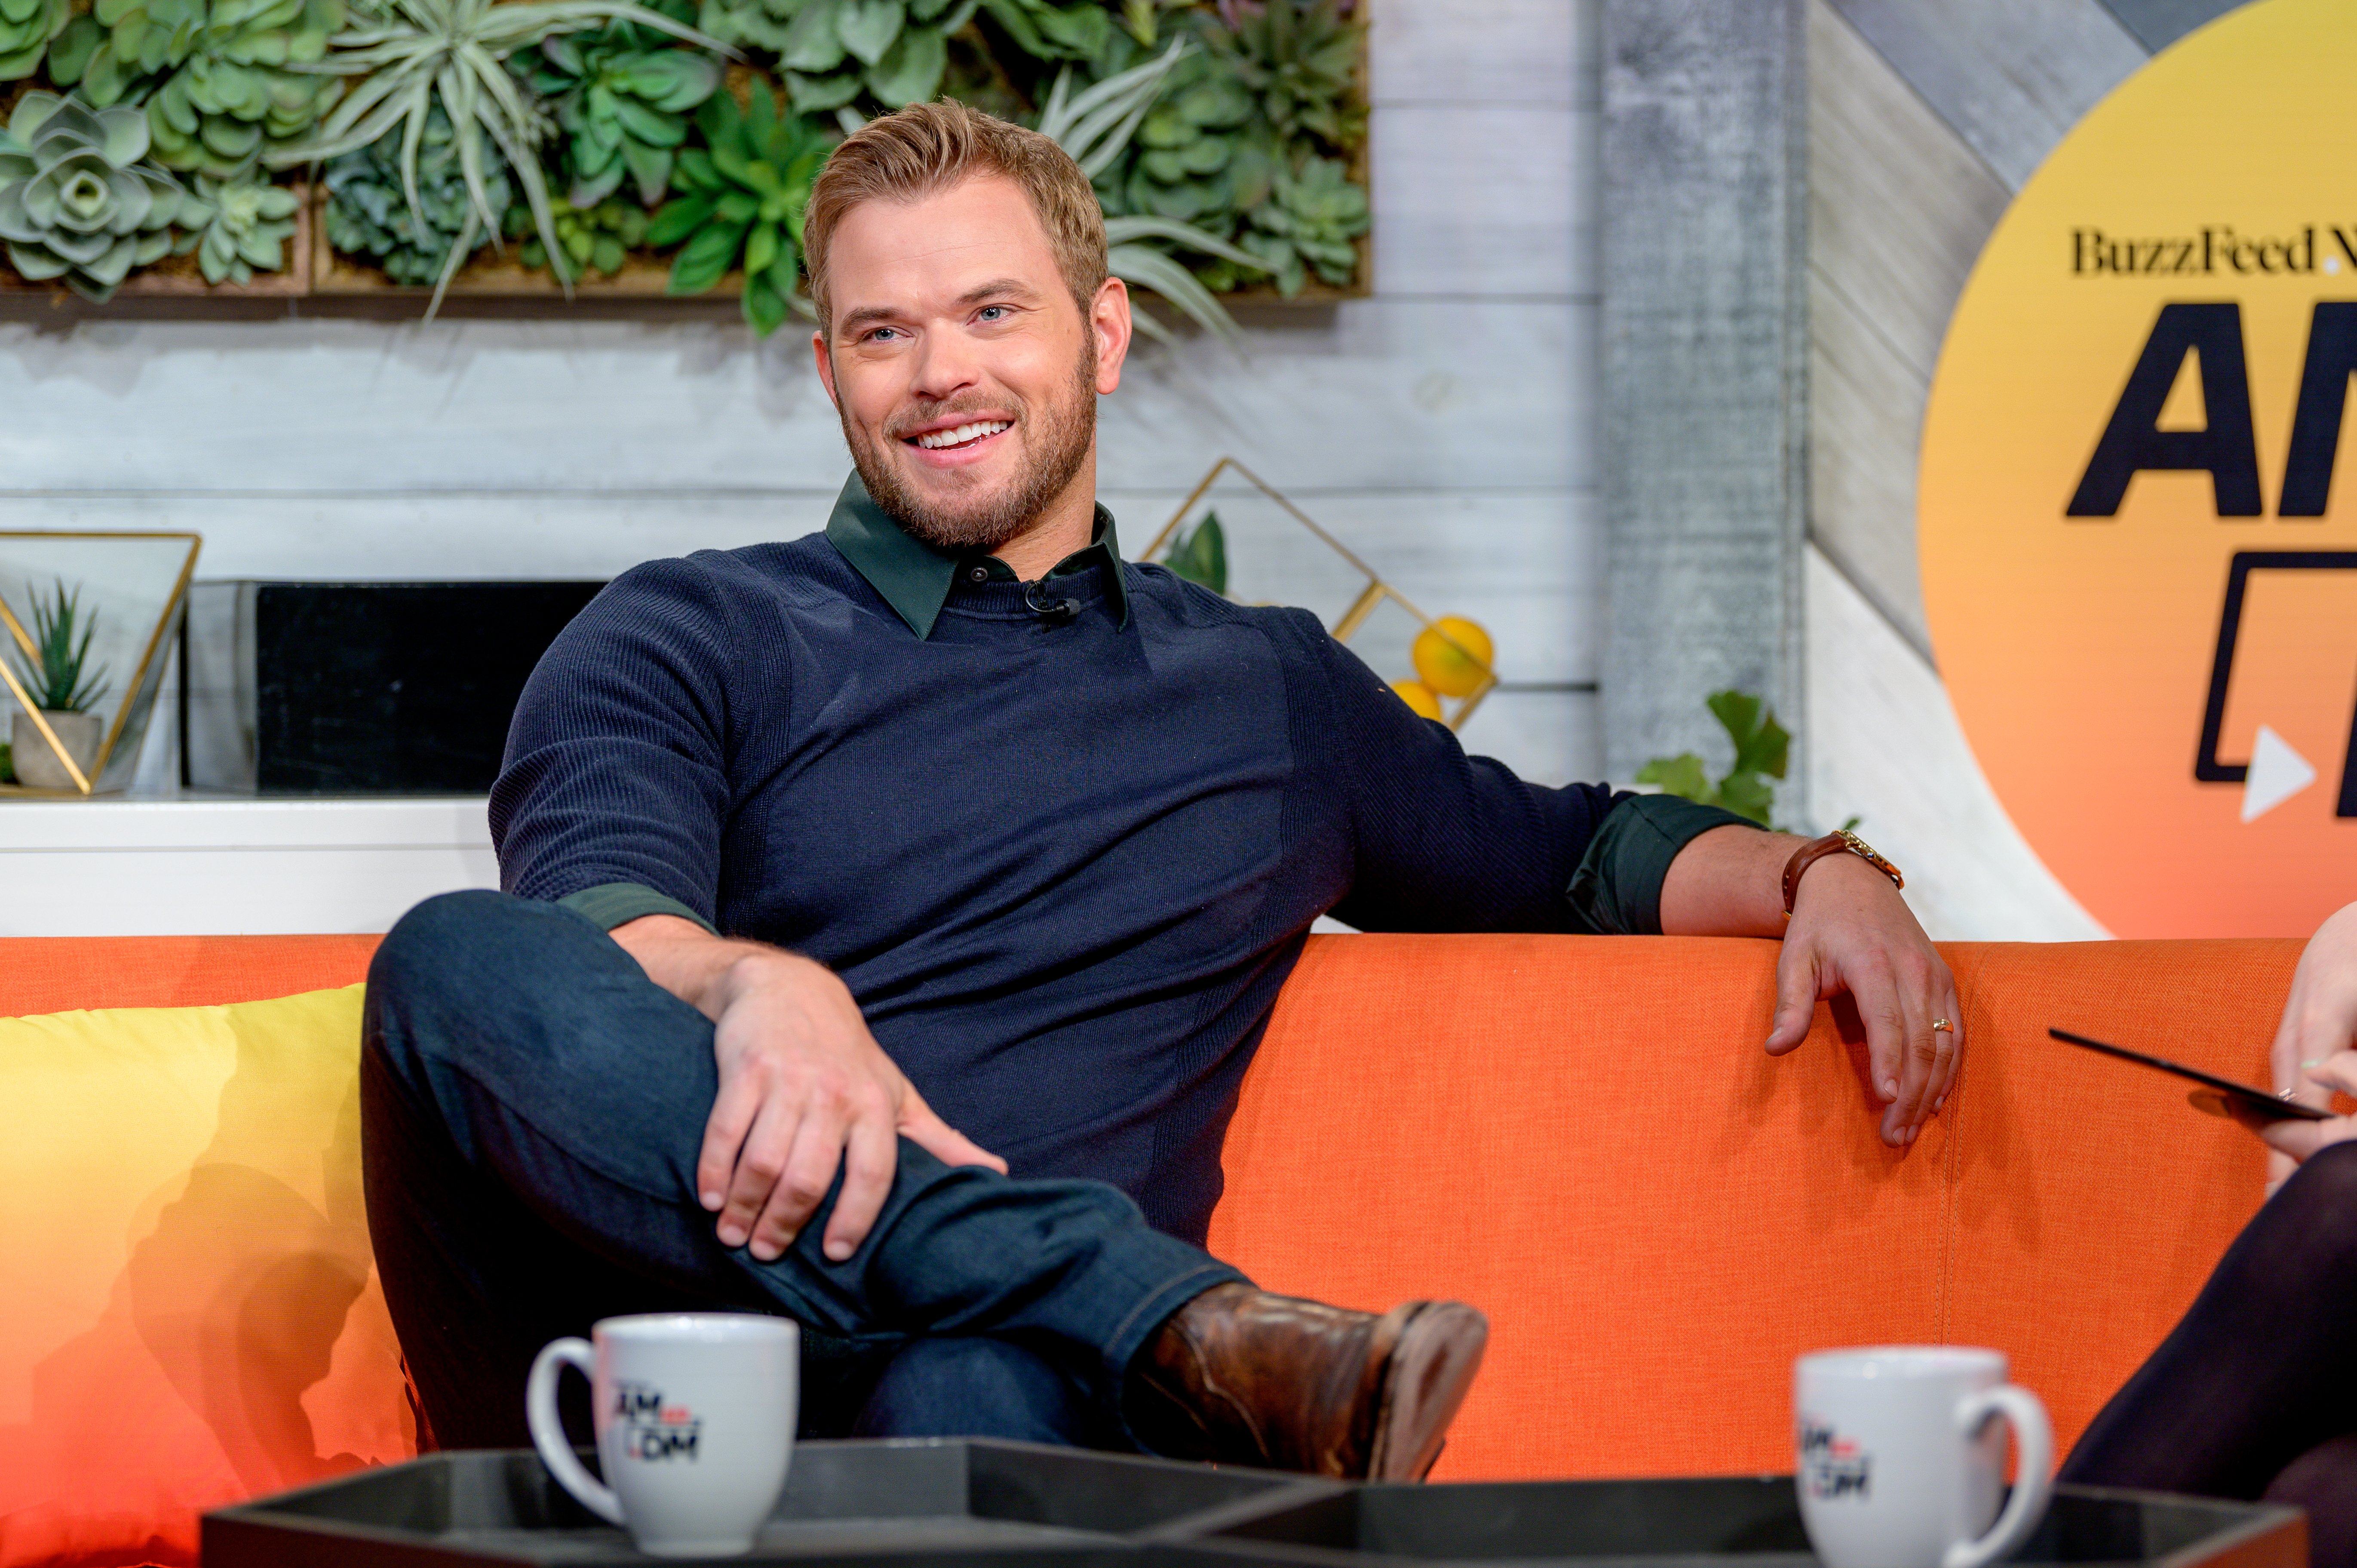 Kellan Lutz discusses "FBI: Most Wanted" as he visits BuzzFeed's "AM To DM" on January 07, 2020 in New York City | Photo: Getty Images